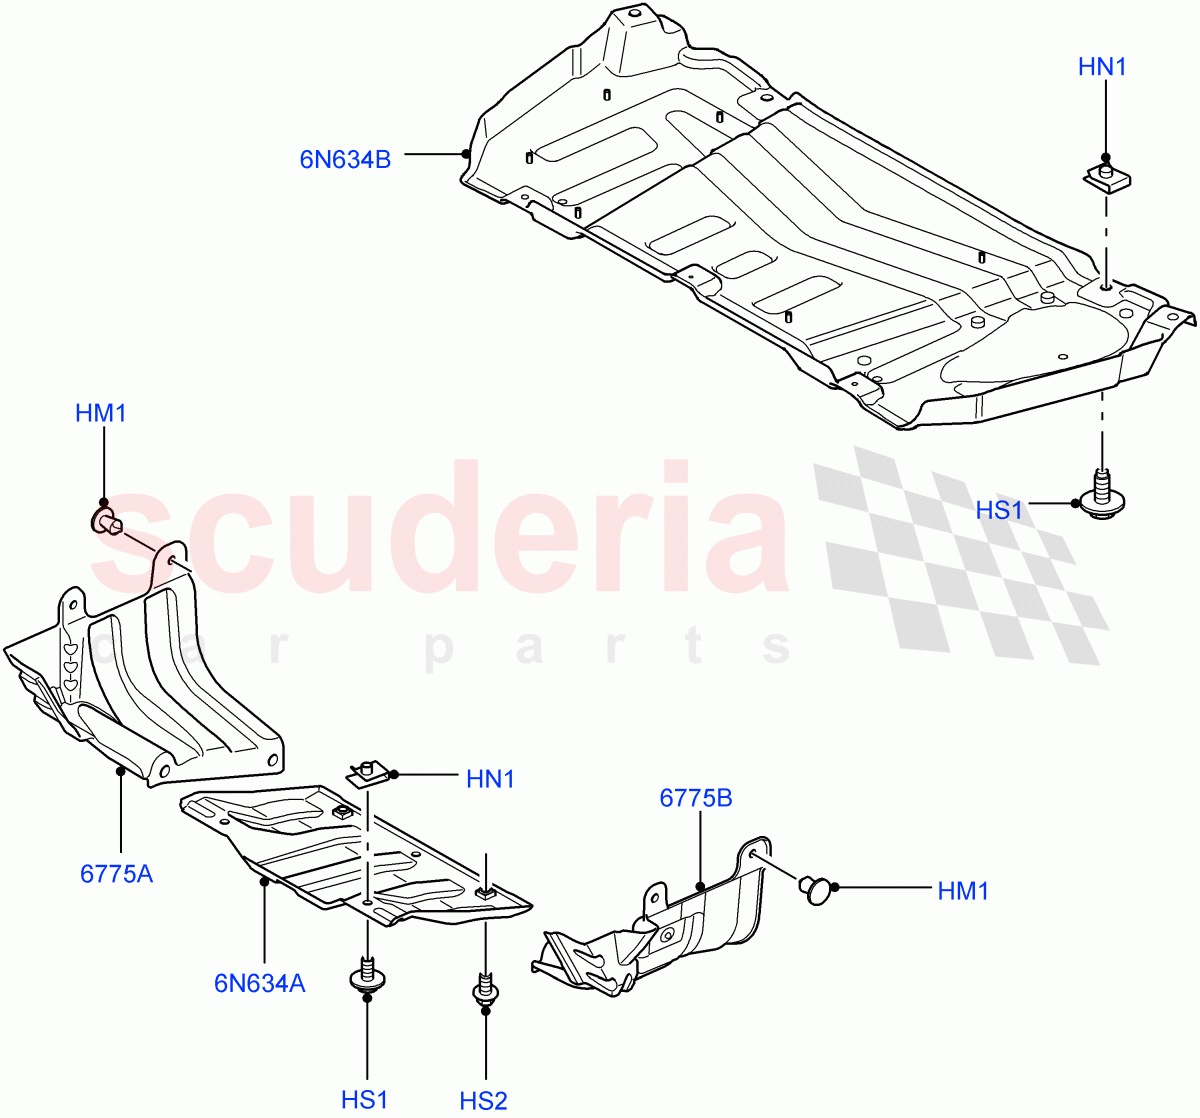 Splash And Heat Shields(Undertray)((V)FROMAA000001) of Land Rover Land Rover Discovery 4 (2010-2016) [5.0 OHC SGDI NA V8 Petrol]